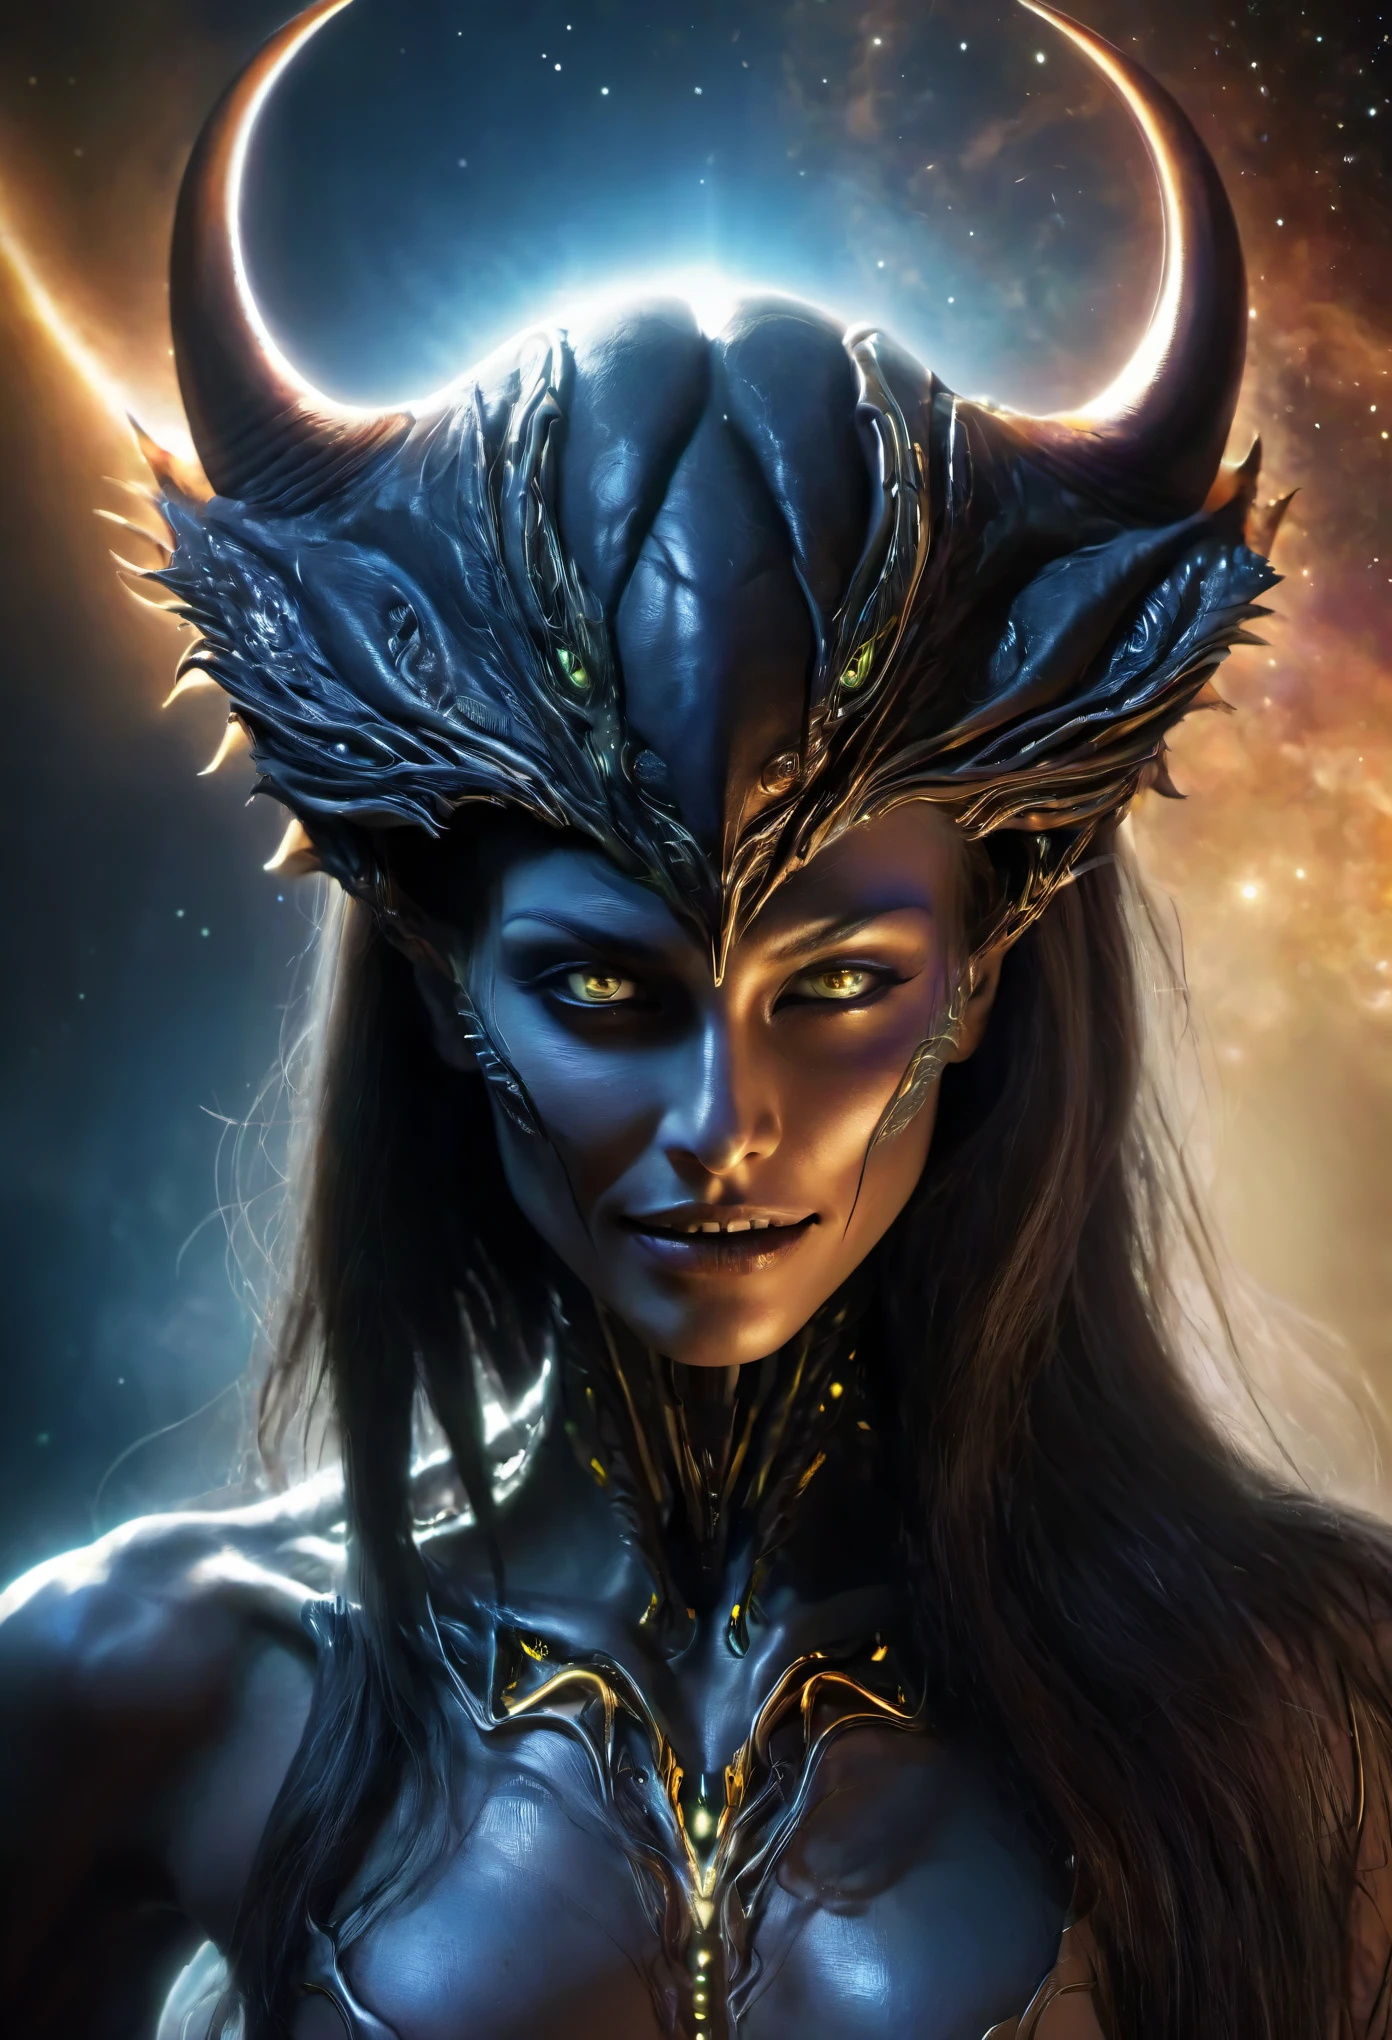 (High resolution,realistic,sharp focus),Humanoid alien creature with a vertically split face forming a mouth shape,beautiful predatory creature There is similar to a woman,Alien/monster hybrid,scary hunter,[cosmic,extraterrestrial] There is,organic matter,otherworldly predator,beyond life,length,flowing hair,earrings,shineing eyes,intense sight,[elegant,graceful],enchanting facial features,[sharp,pointed,elengthated] teeth,[toxic,toxic] tooth,intense,enchanting smile,Smooth yet muscular body,[curve,shape] There is similar to a woman,[graceful,Towering] before,Alien skin texture resembling iridescent scales,[ethereal,luminescent] shine,[Evil,Unlucky] aura,Slurping,bipedal walking,[tranquility,predatory] enchanting footsteps,hypnotic] dance,[spooky,Unforgettable] grace,contrasting colors,[darkness,Shadow] hug a living thing,dystopian background scenery,[cosmic,Milky Way] background,Unlucky celestial bodies,pulsating clouds,[extraterrestrial,surreal] vegetation,rays of ethereal light [filtering,caress] scene,dramatic chiaroscuro lighting,penetrating the darkness,Create an intimate yet frightening atmosphere.